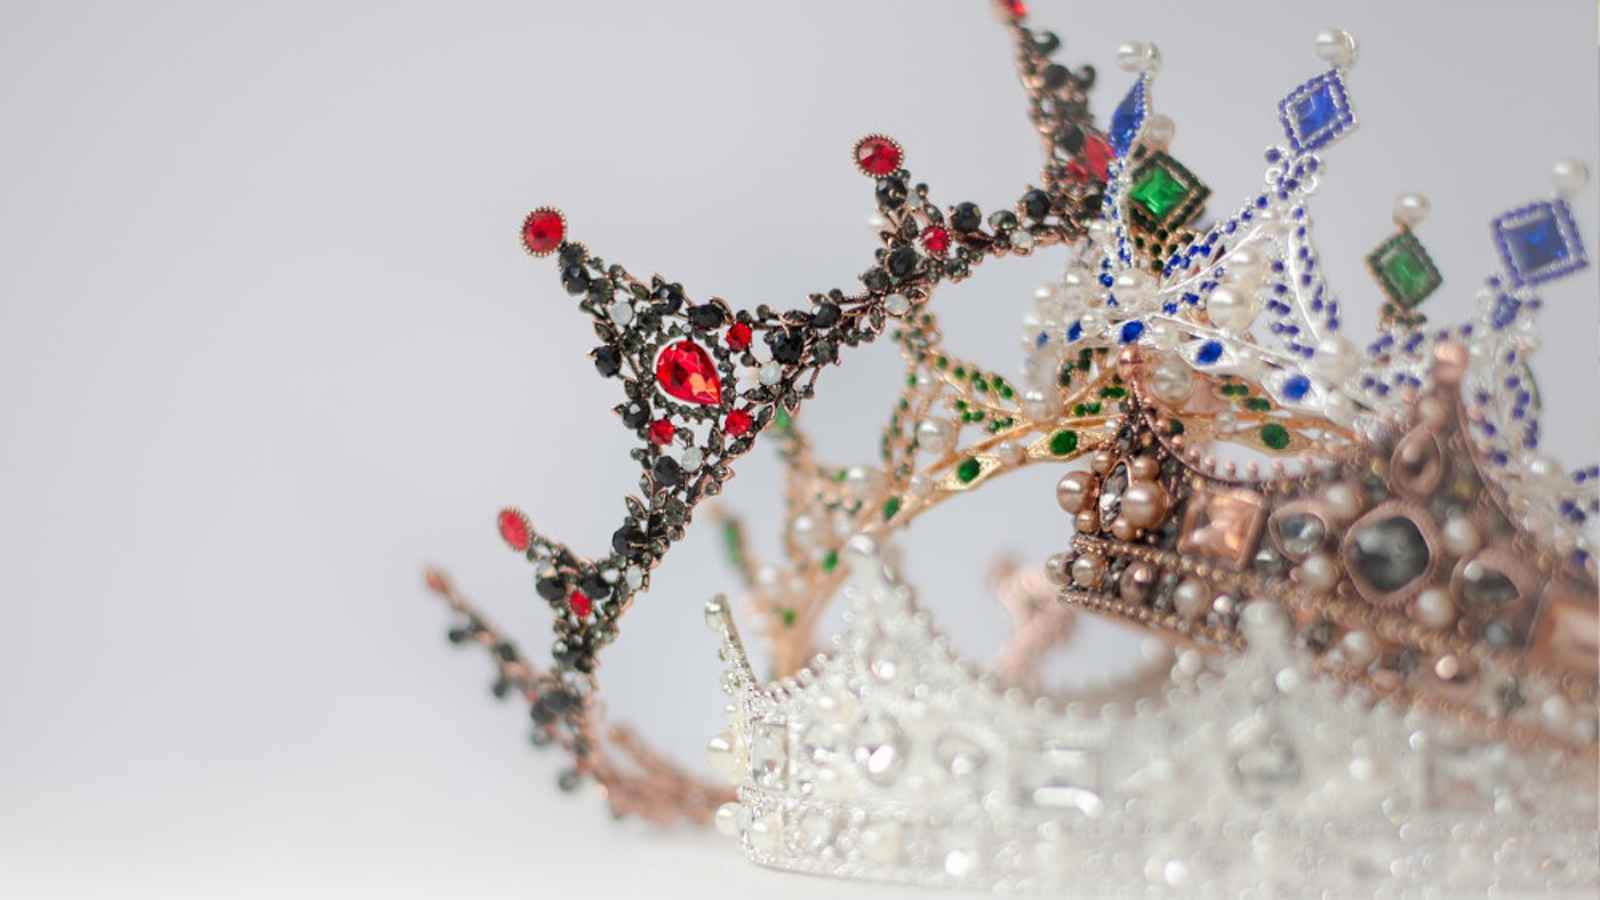 Tiara Day 2023: Date, History, Facts, Activities